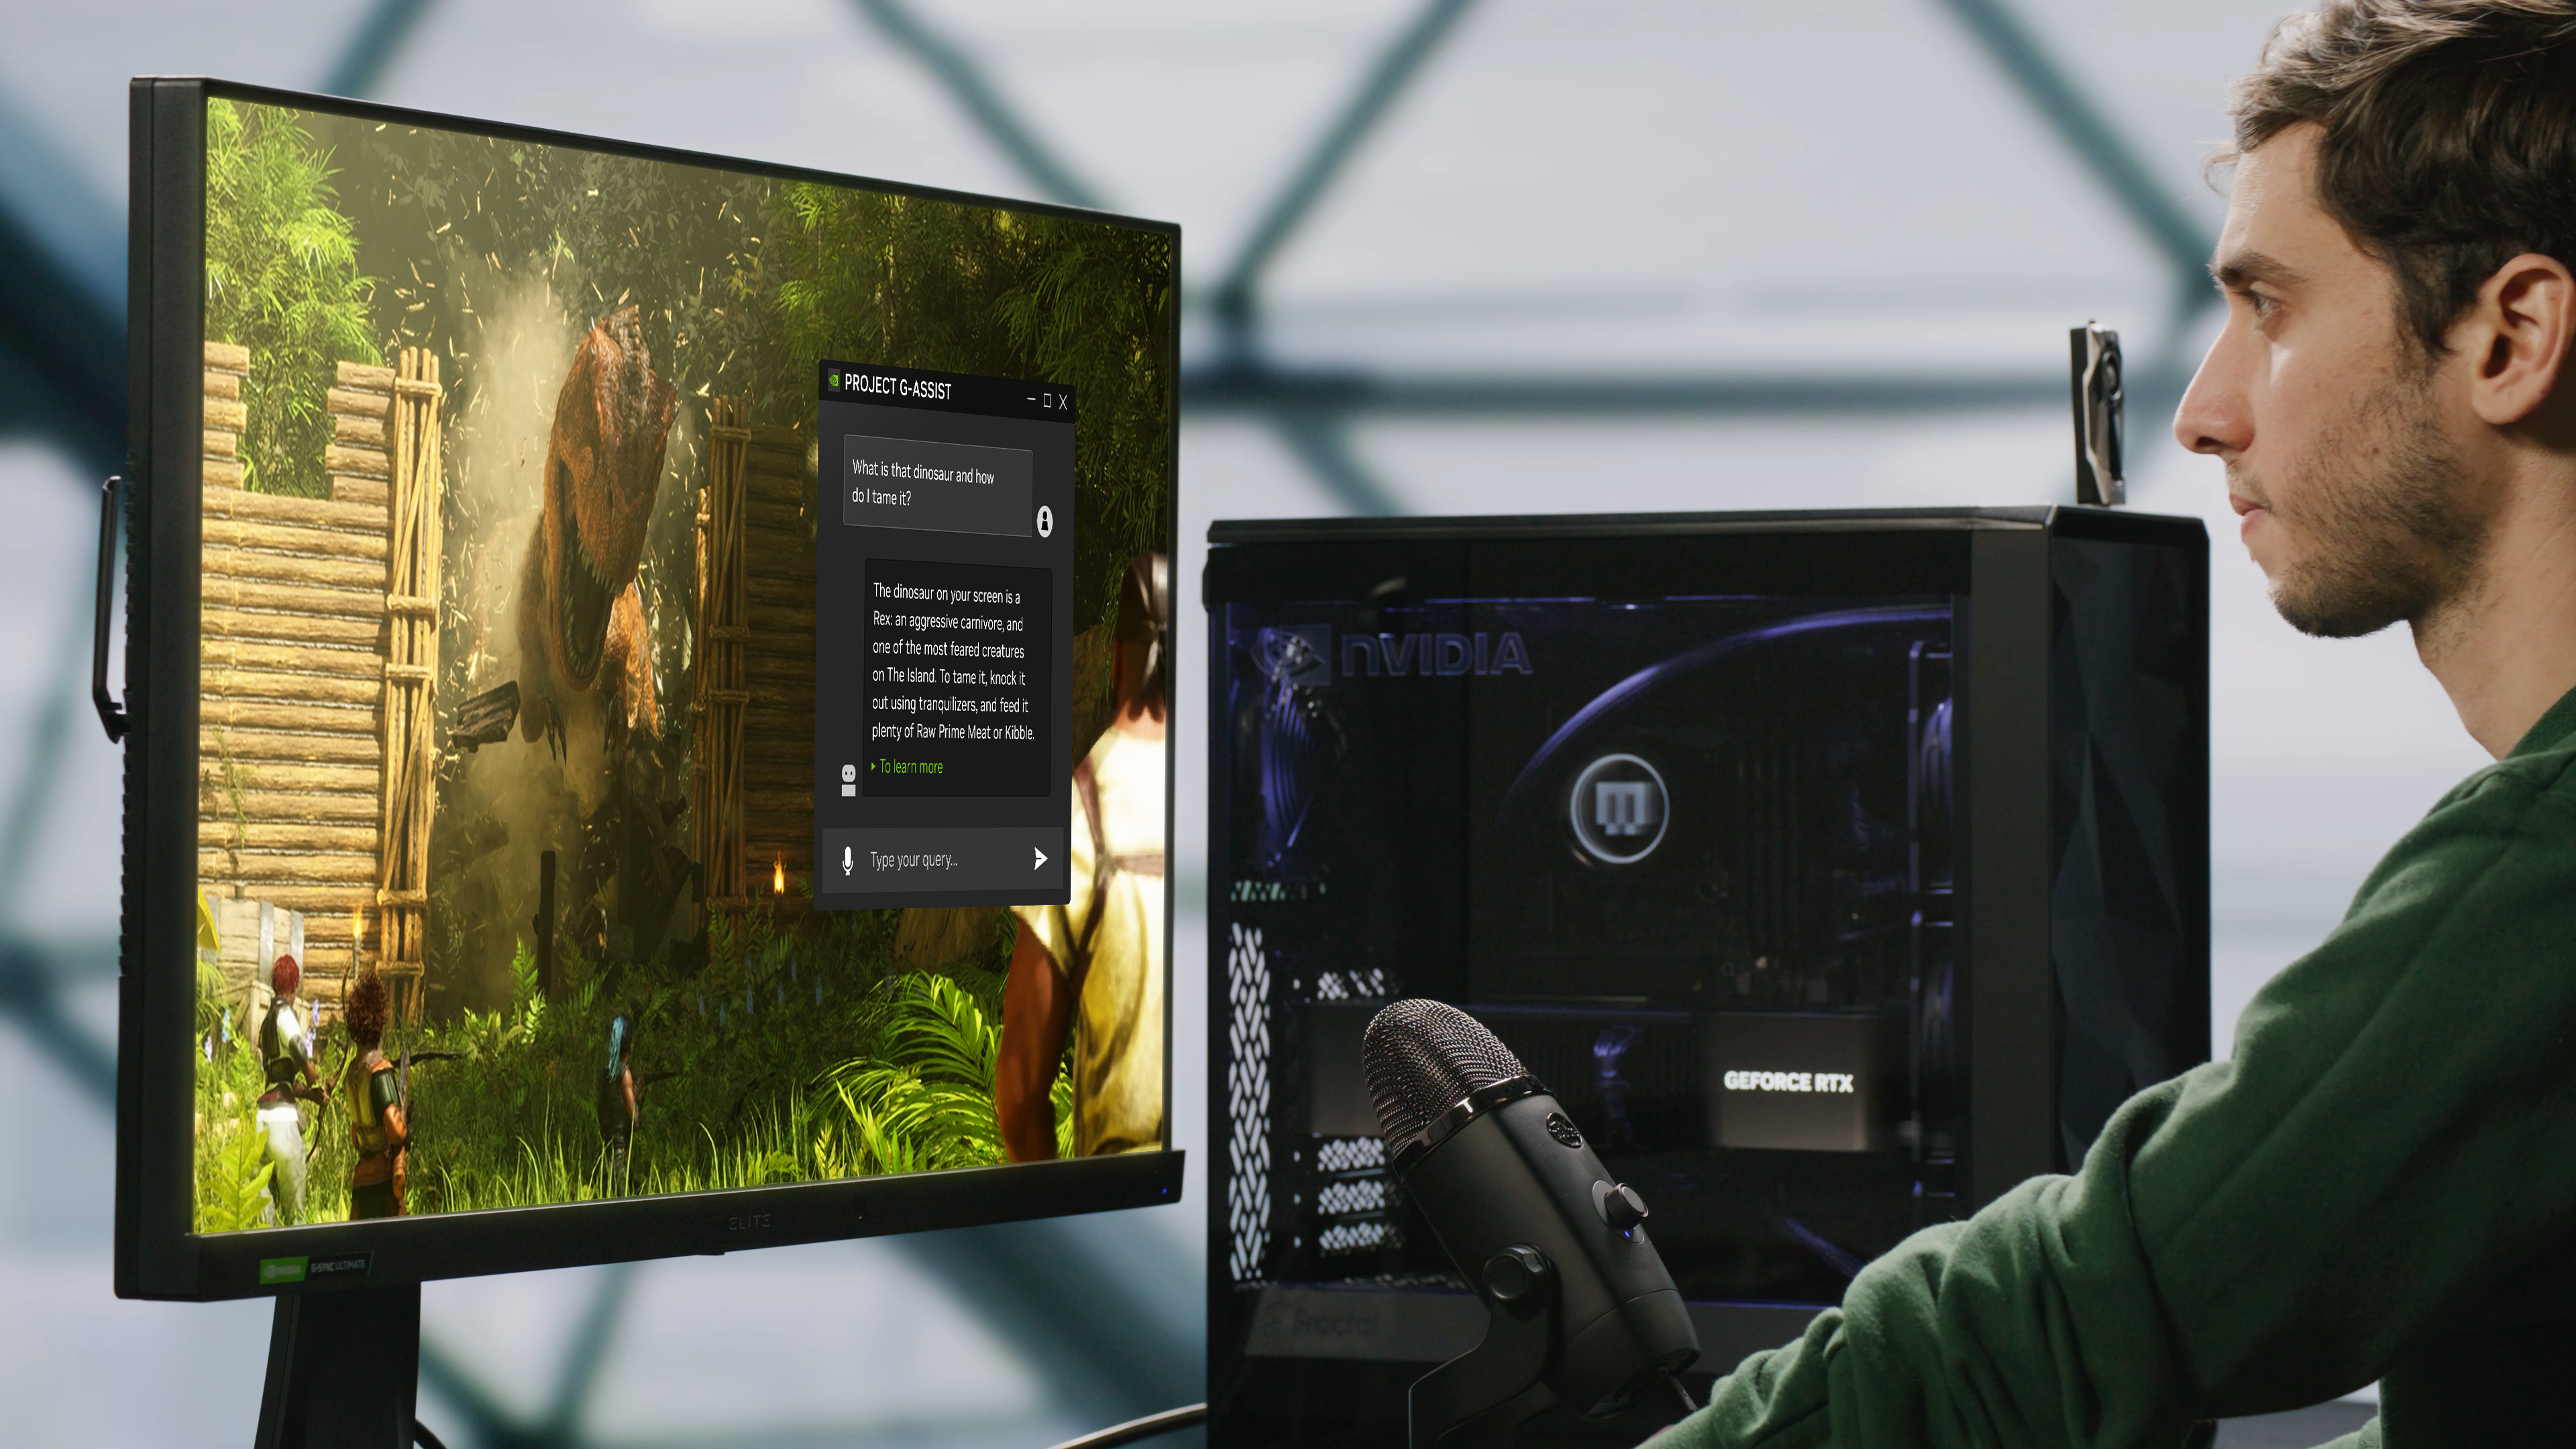 Nvidia shows AI-powered game assistants and NPCs coming to RTX GPUs with local AI inference